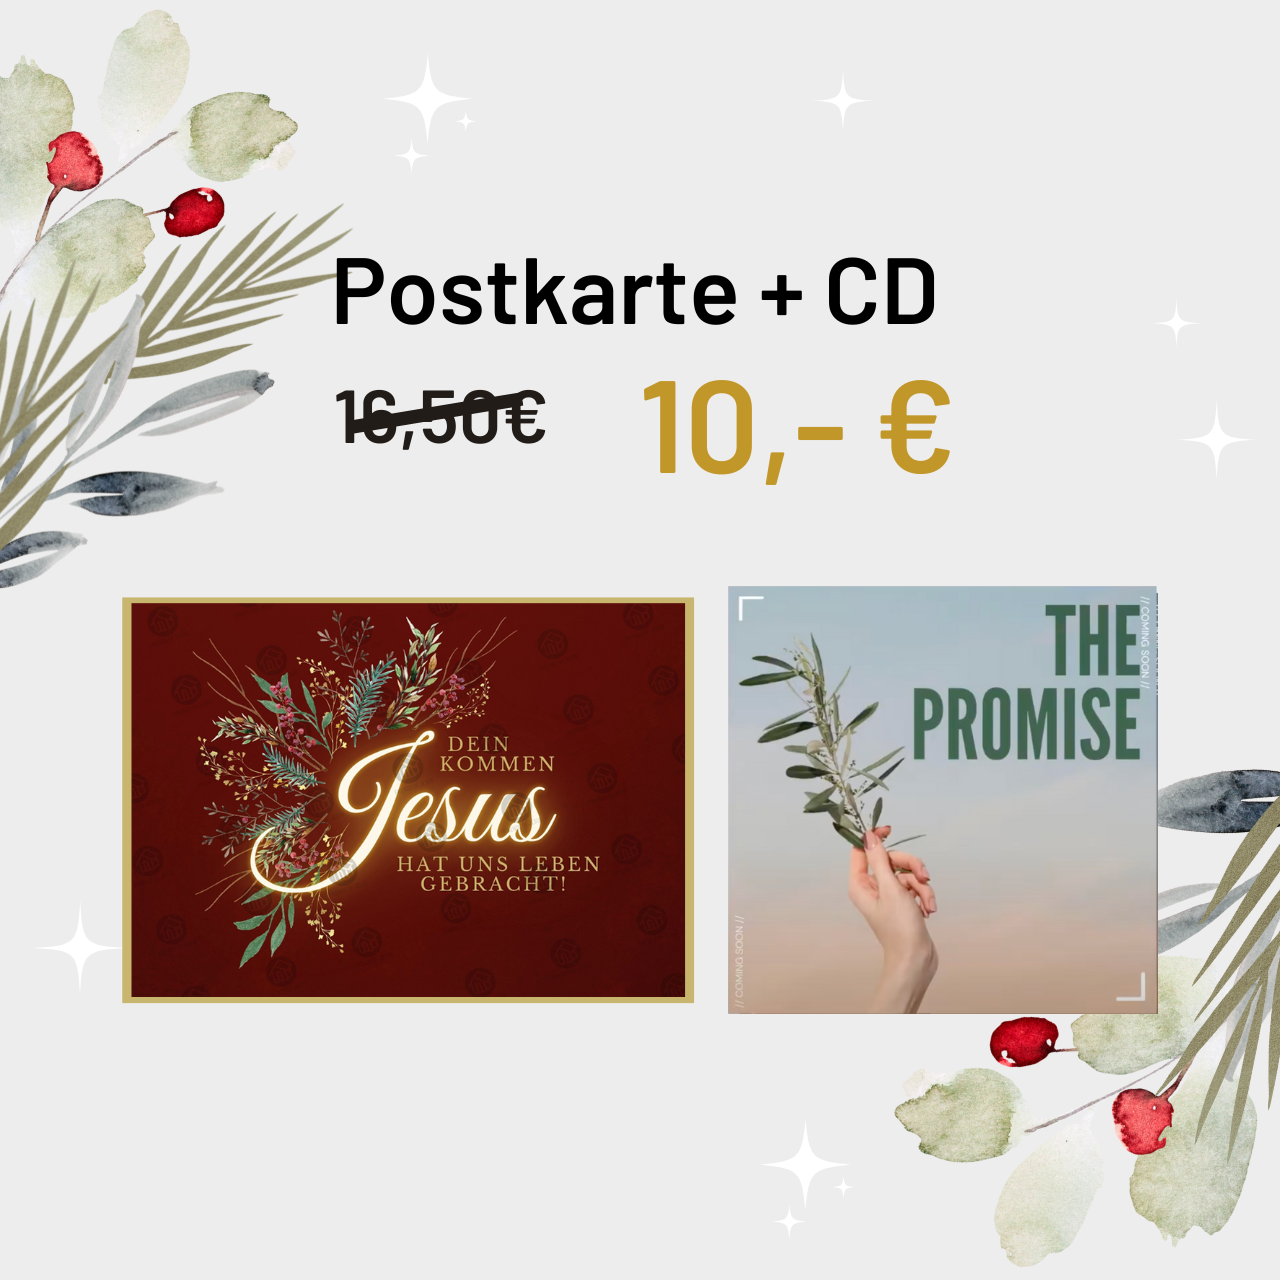 The Promise Special (CD + Postkarte)